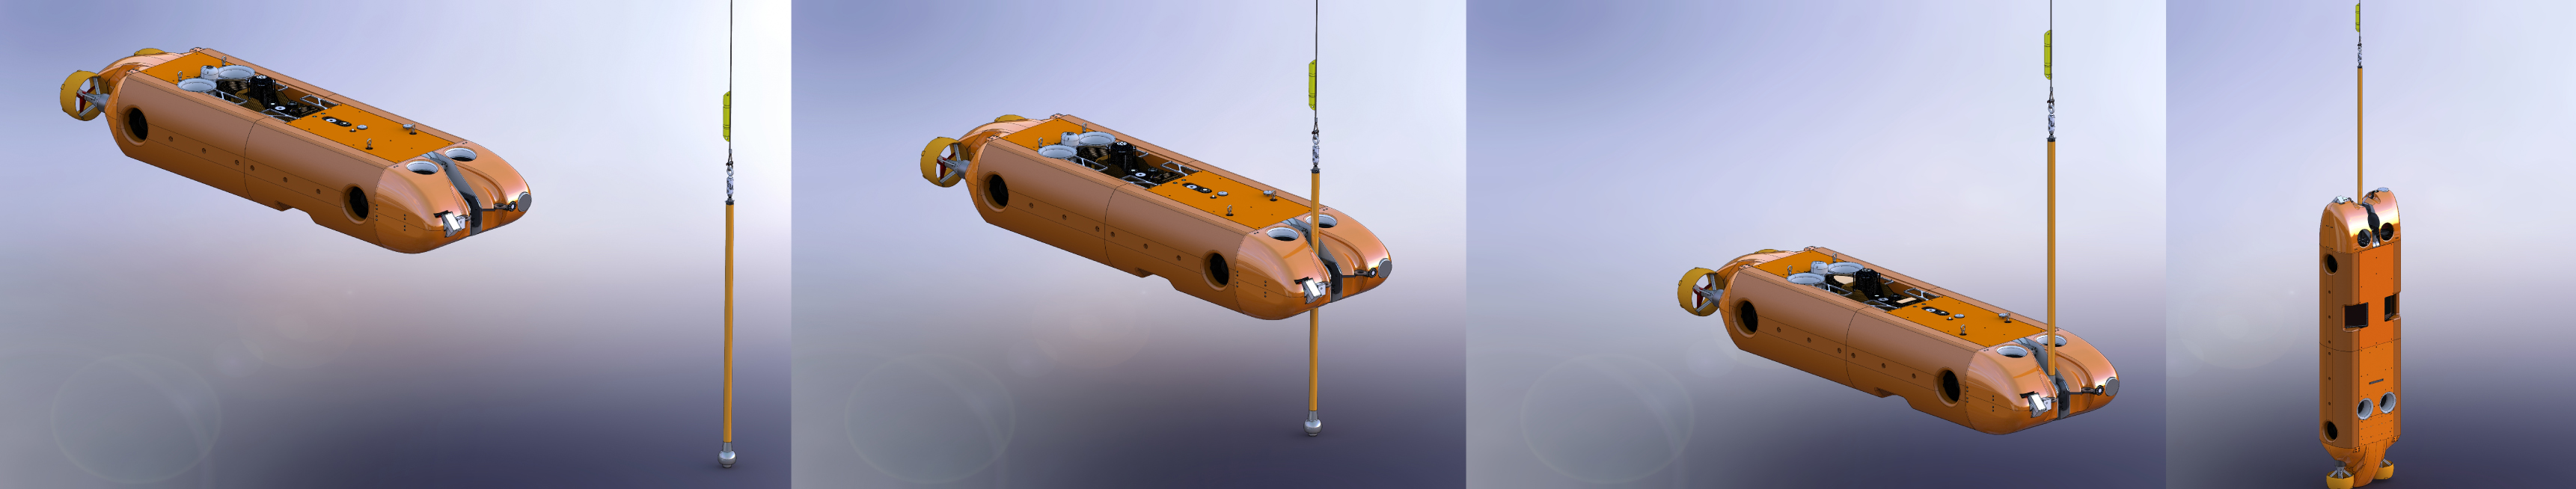 ARTEMIS hover-capable AUV docking sequence